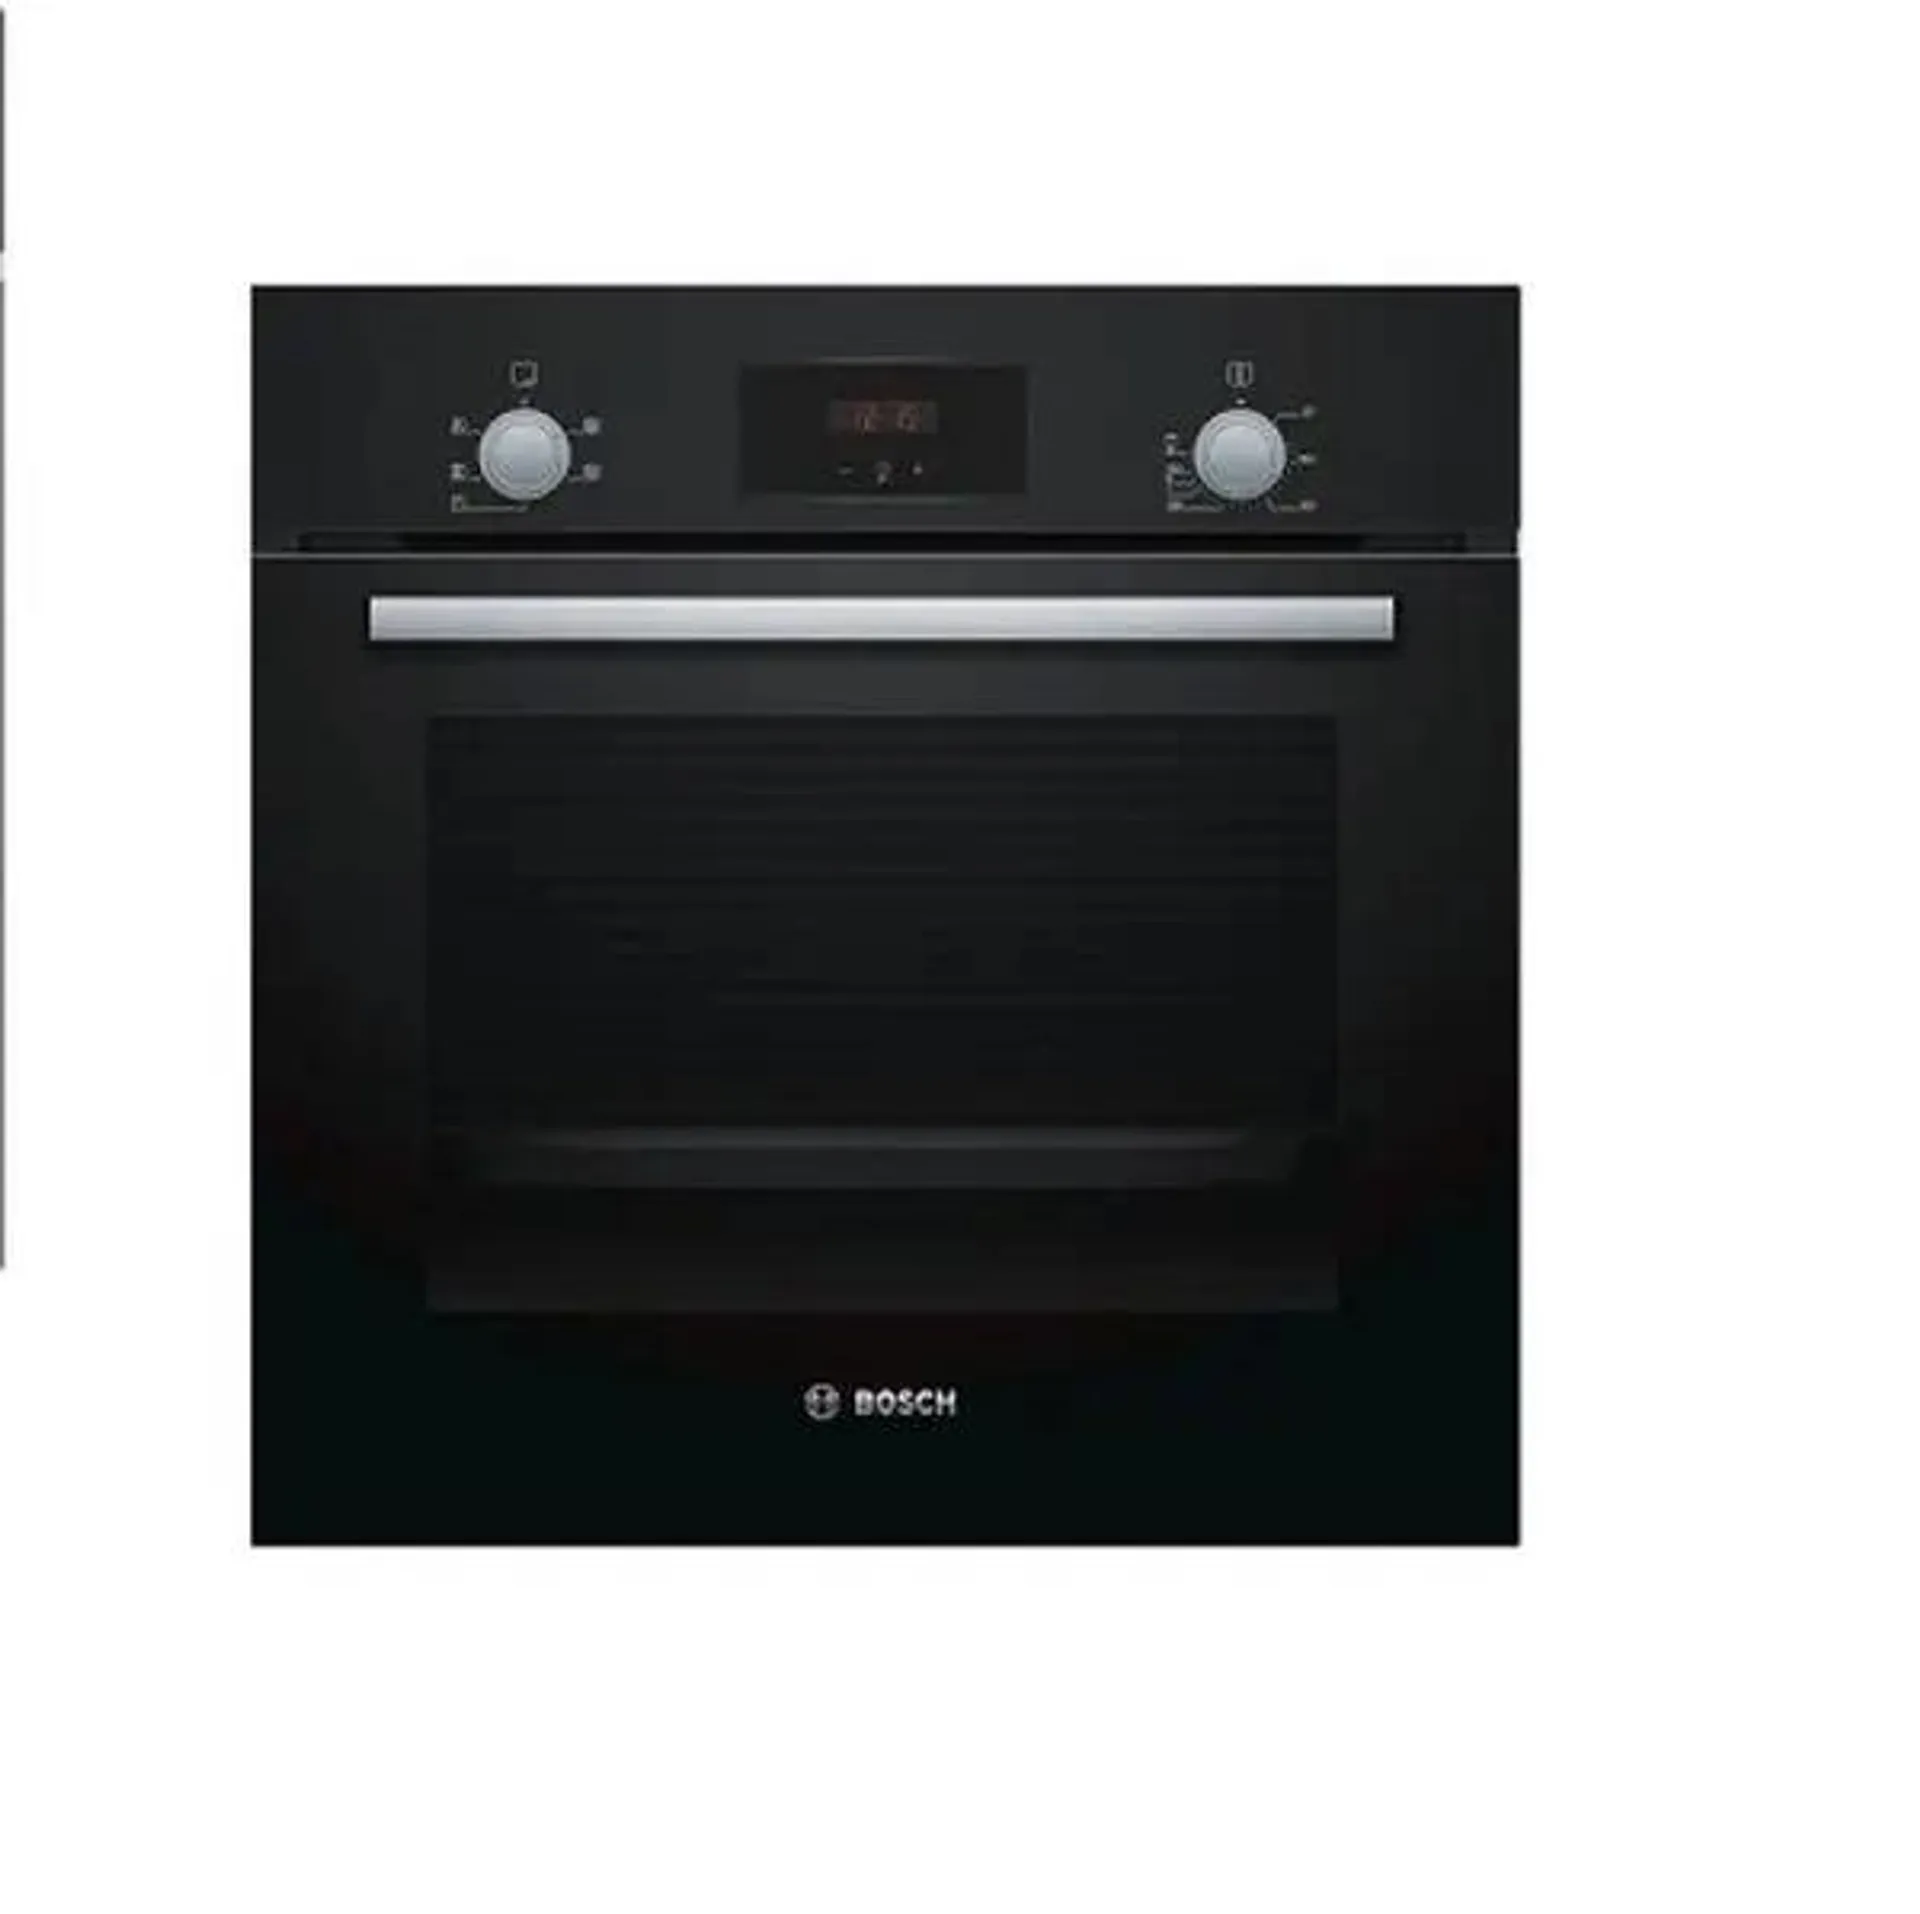 Bosch Built in Single Electric Oven- Black